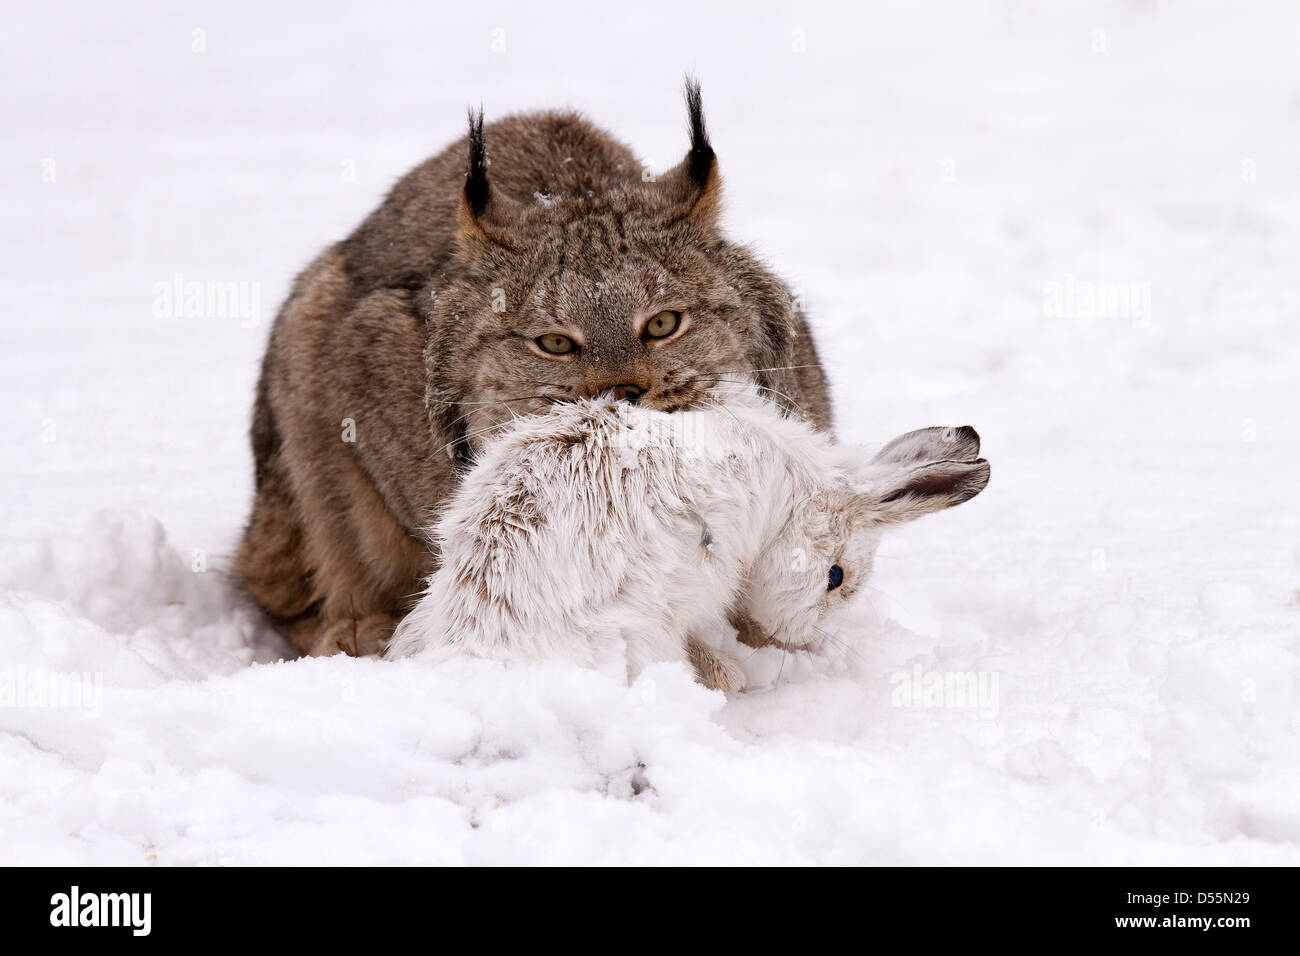 Canada Lynx, Lynx canadansis in snow, with Snowshoe Hare Stock Photo